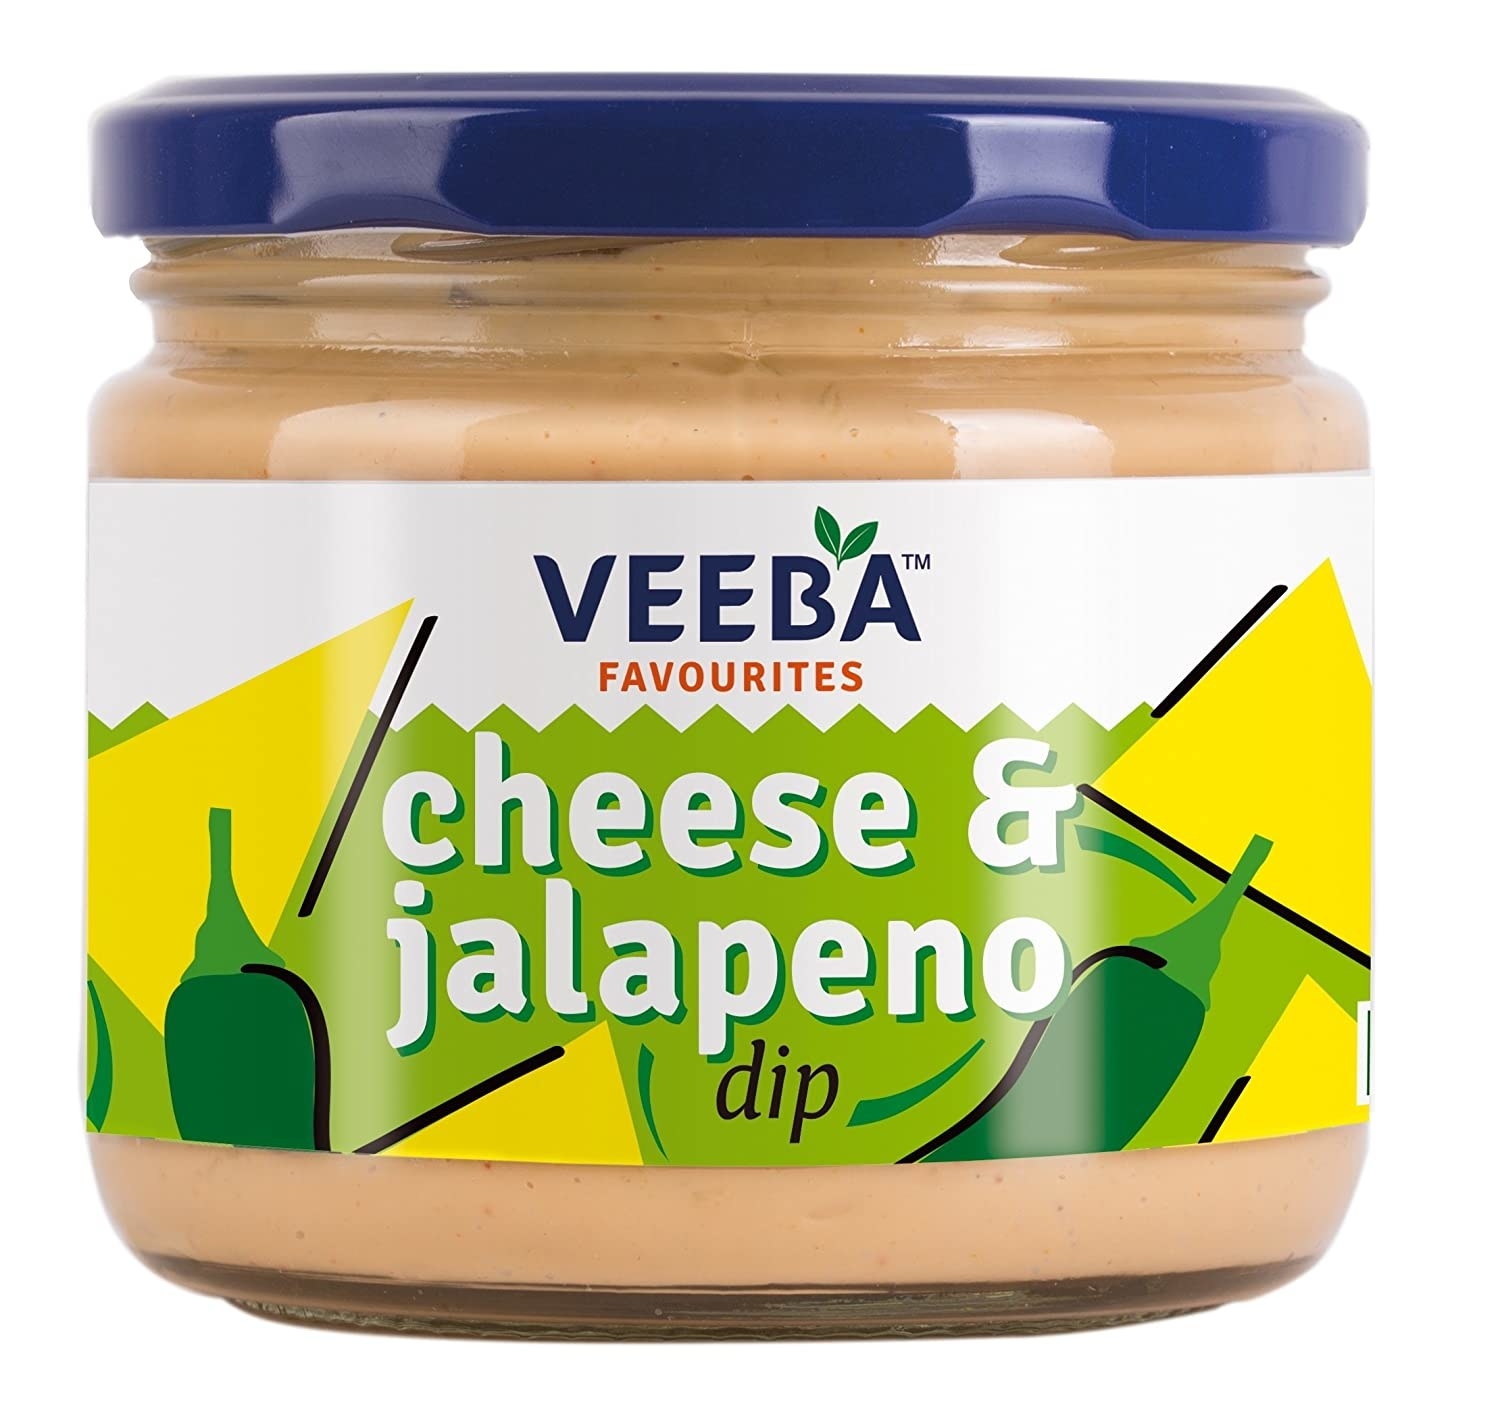 Packaging of the cheese and jalapeno dip jar 